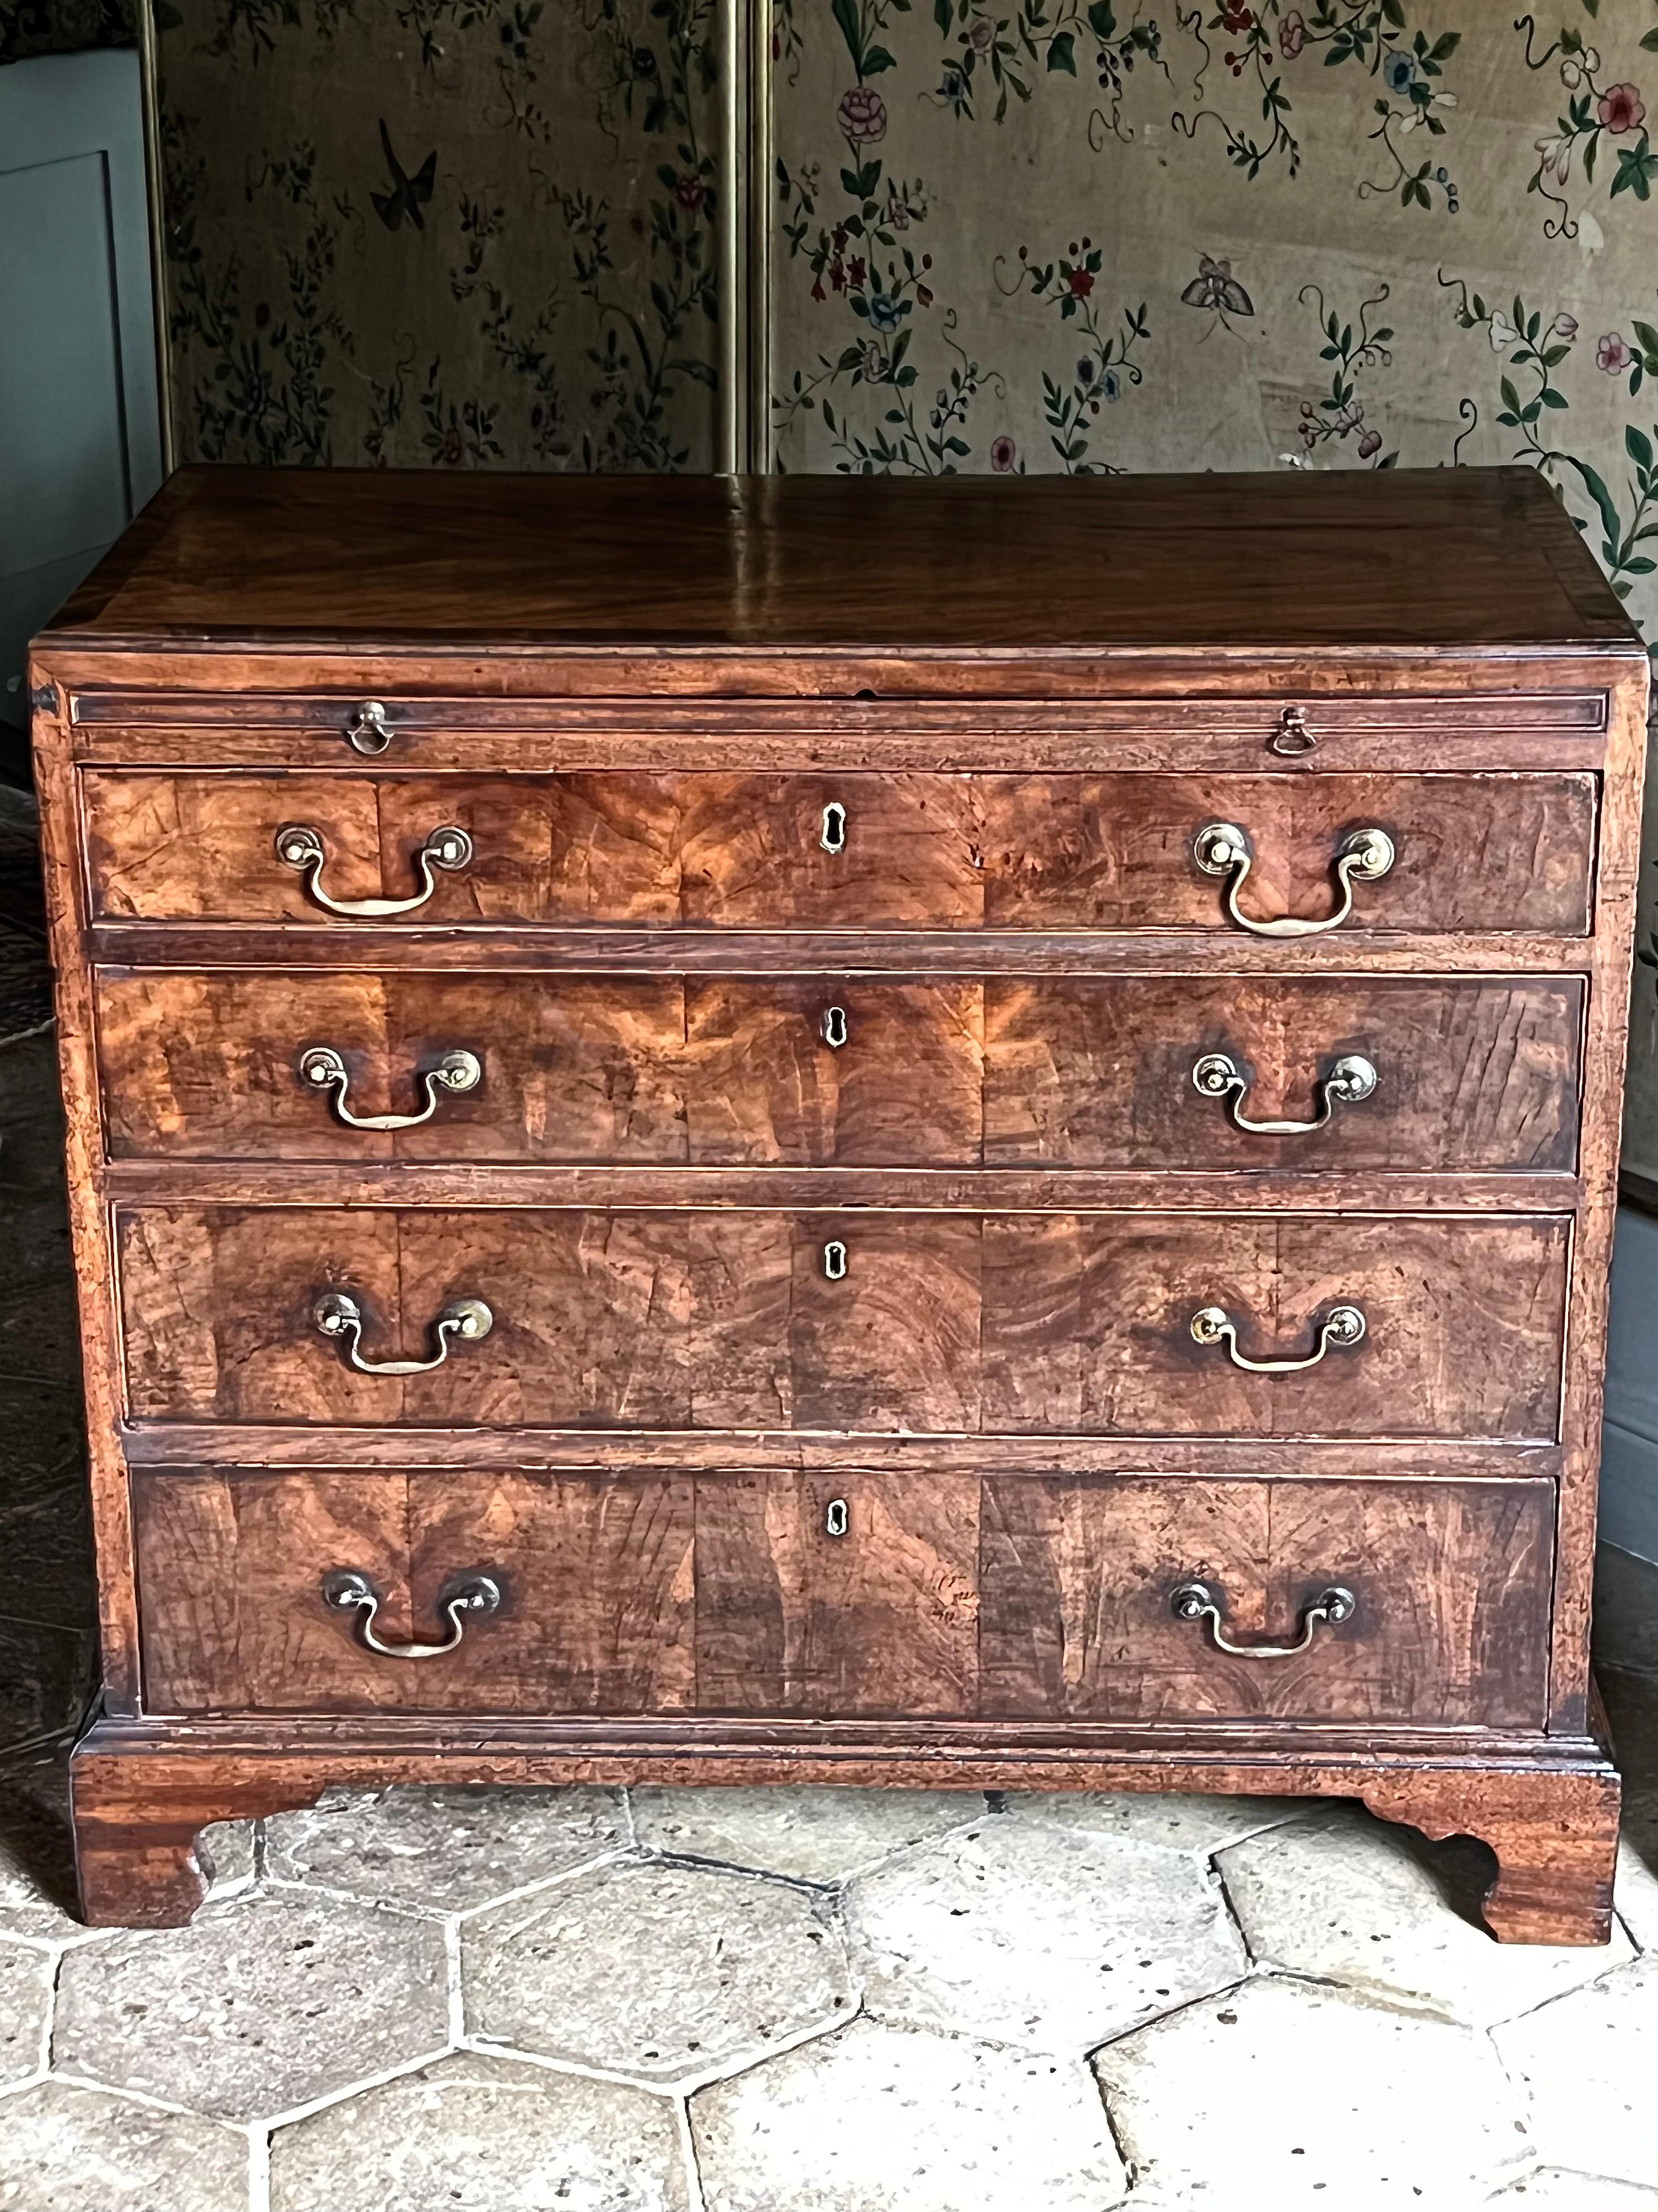 An English George III-period walnut and mahogany caddy-top bachelor’s chest. Mid-eighteenth century, ca 1760.

This is a superb quality bachelor chest with slide, in a rare combination of well-figured walnut and mahogany of deep, rich